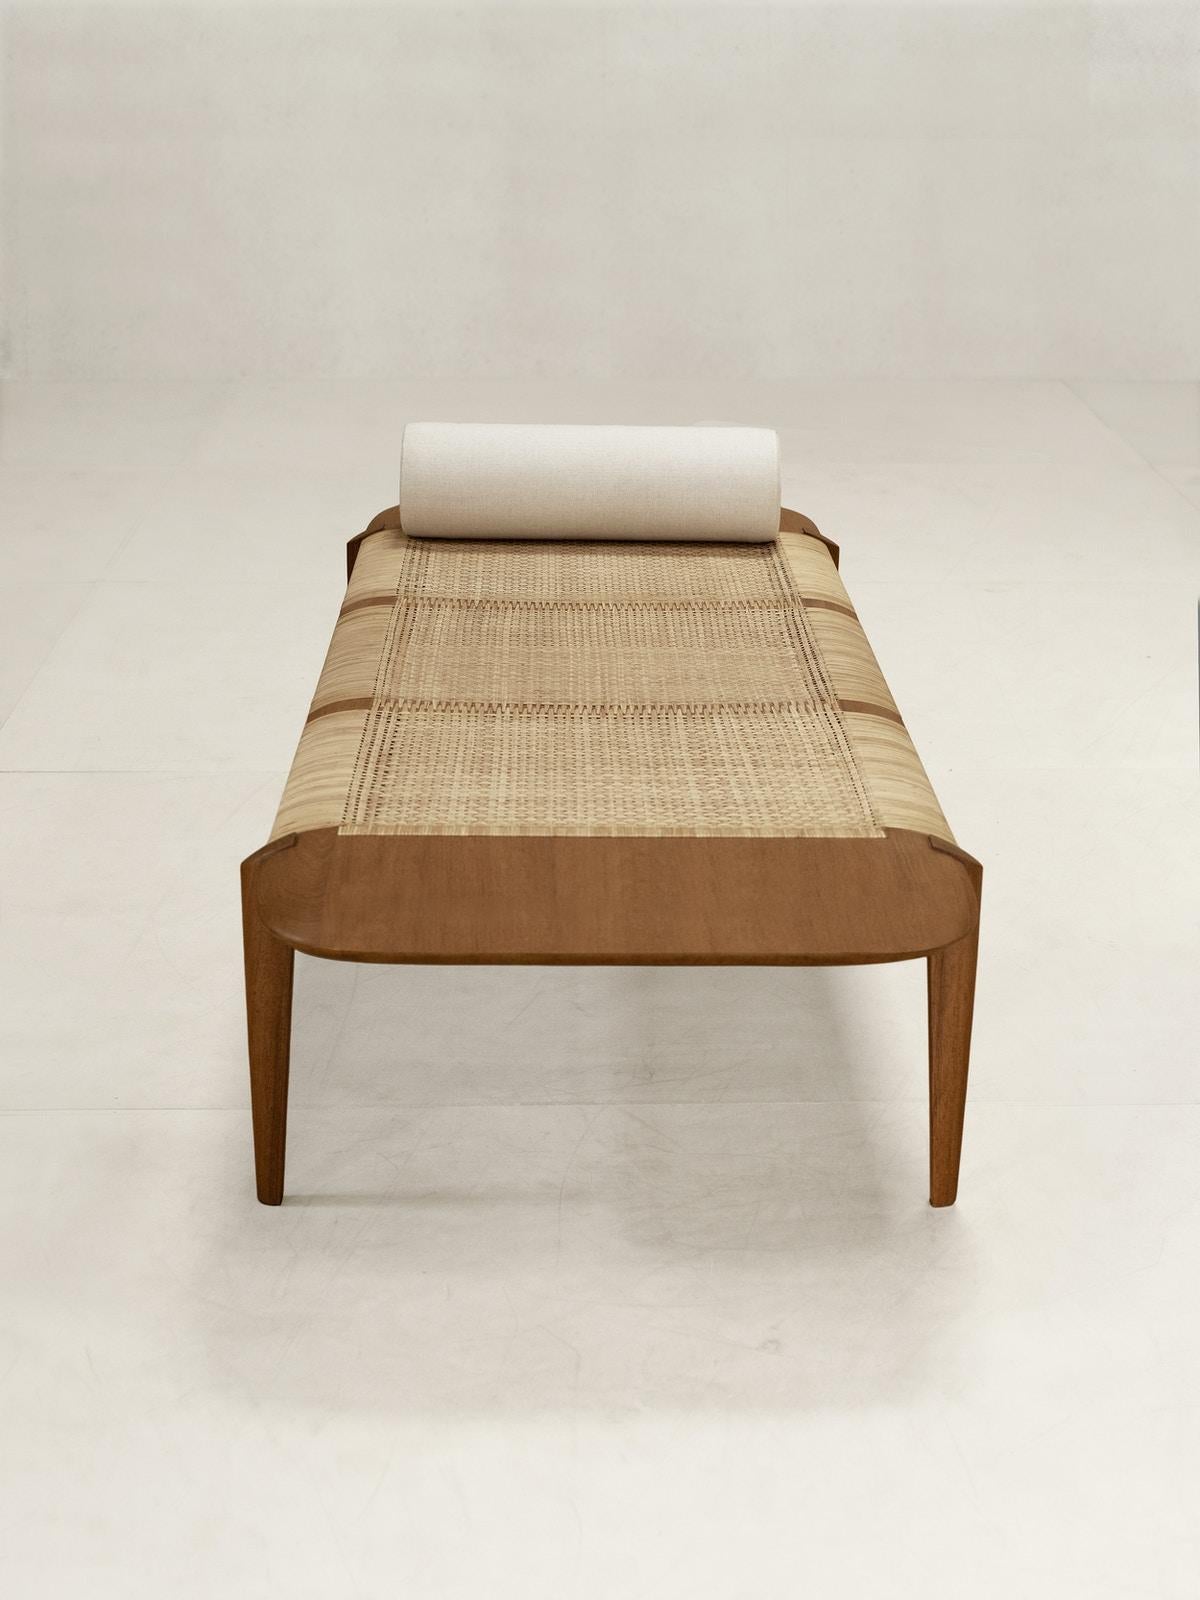 21st century designed by INODA+SVEJE day bed teak

The Tangali Day bed is part of the second collection designed by INODA+SVEJE for Phantom Hands. Innovation in cane weaving pattern was a hallmark of the design process for the Tangali collection.